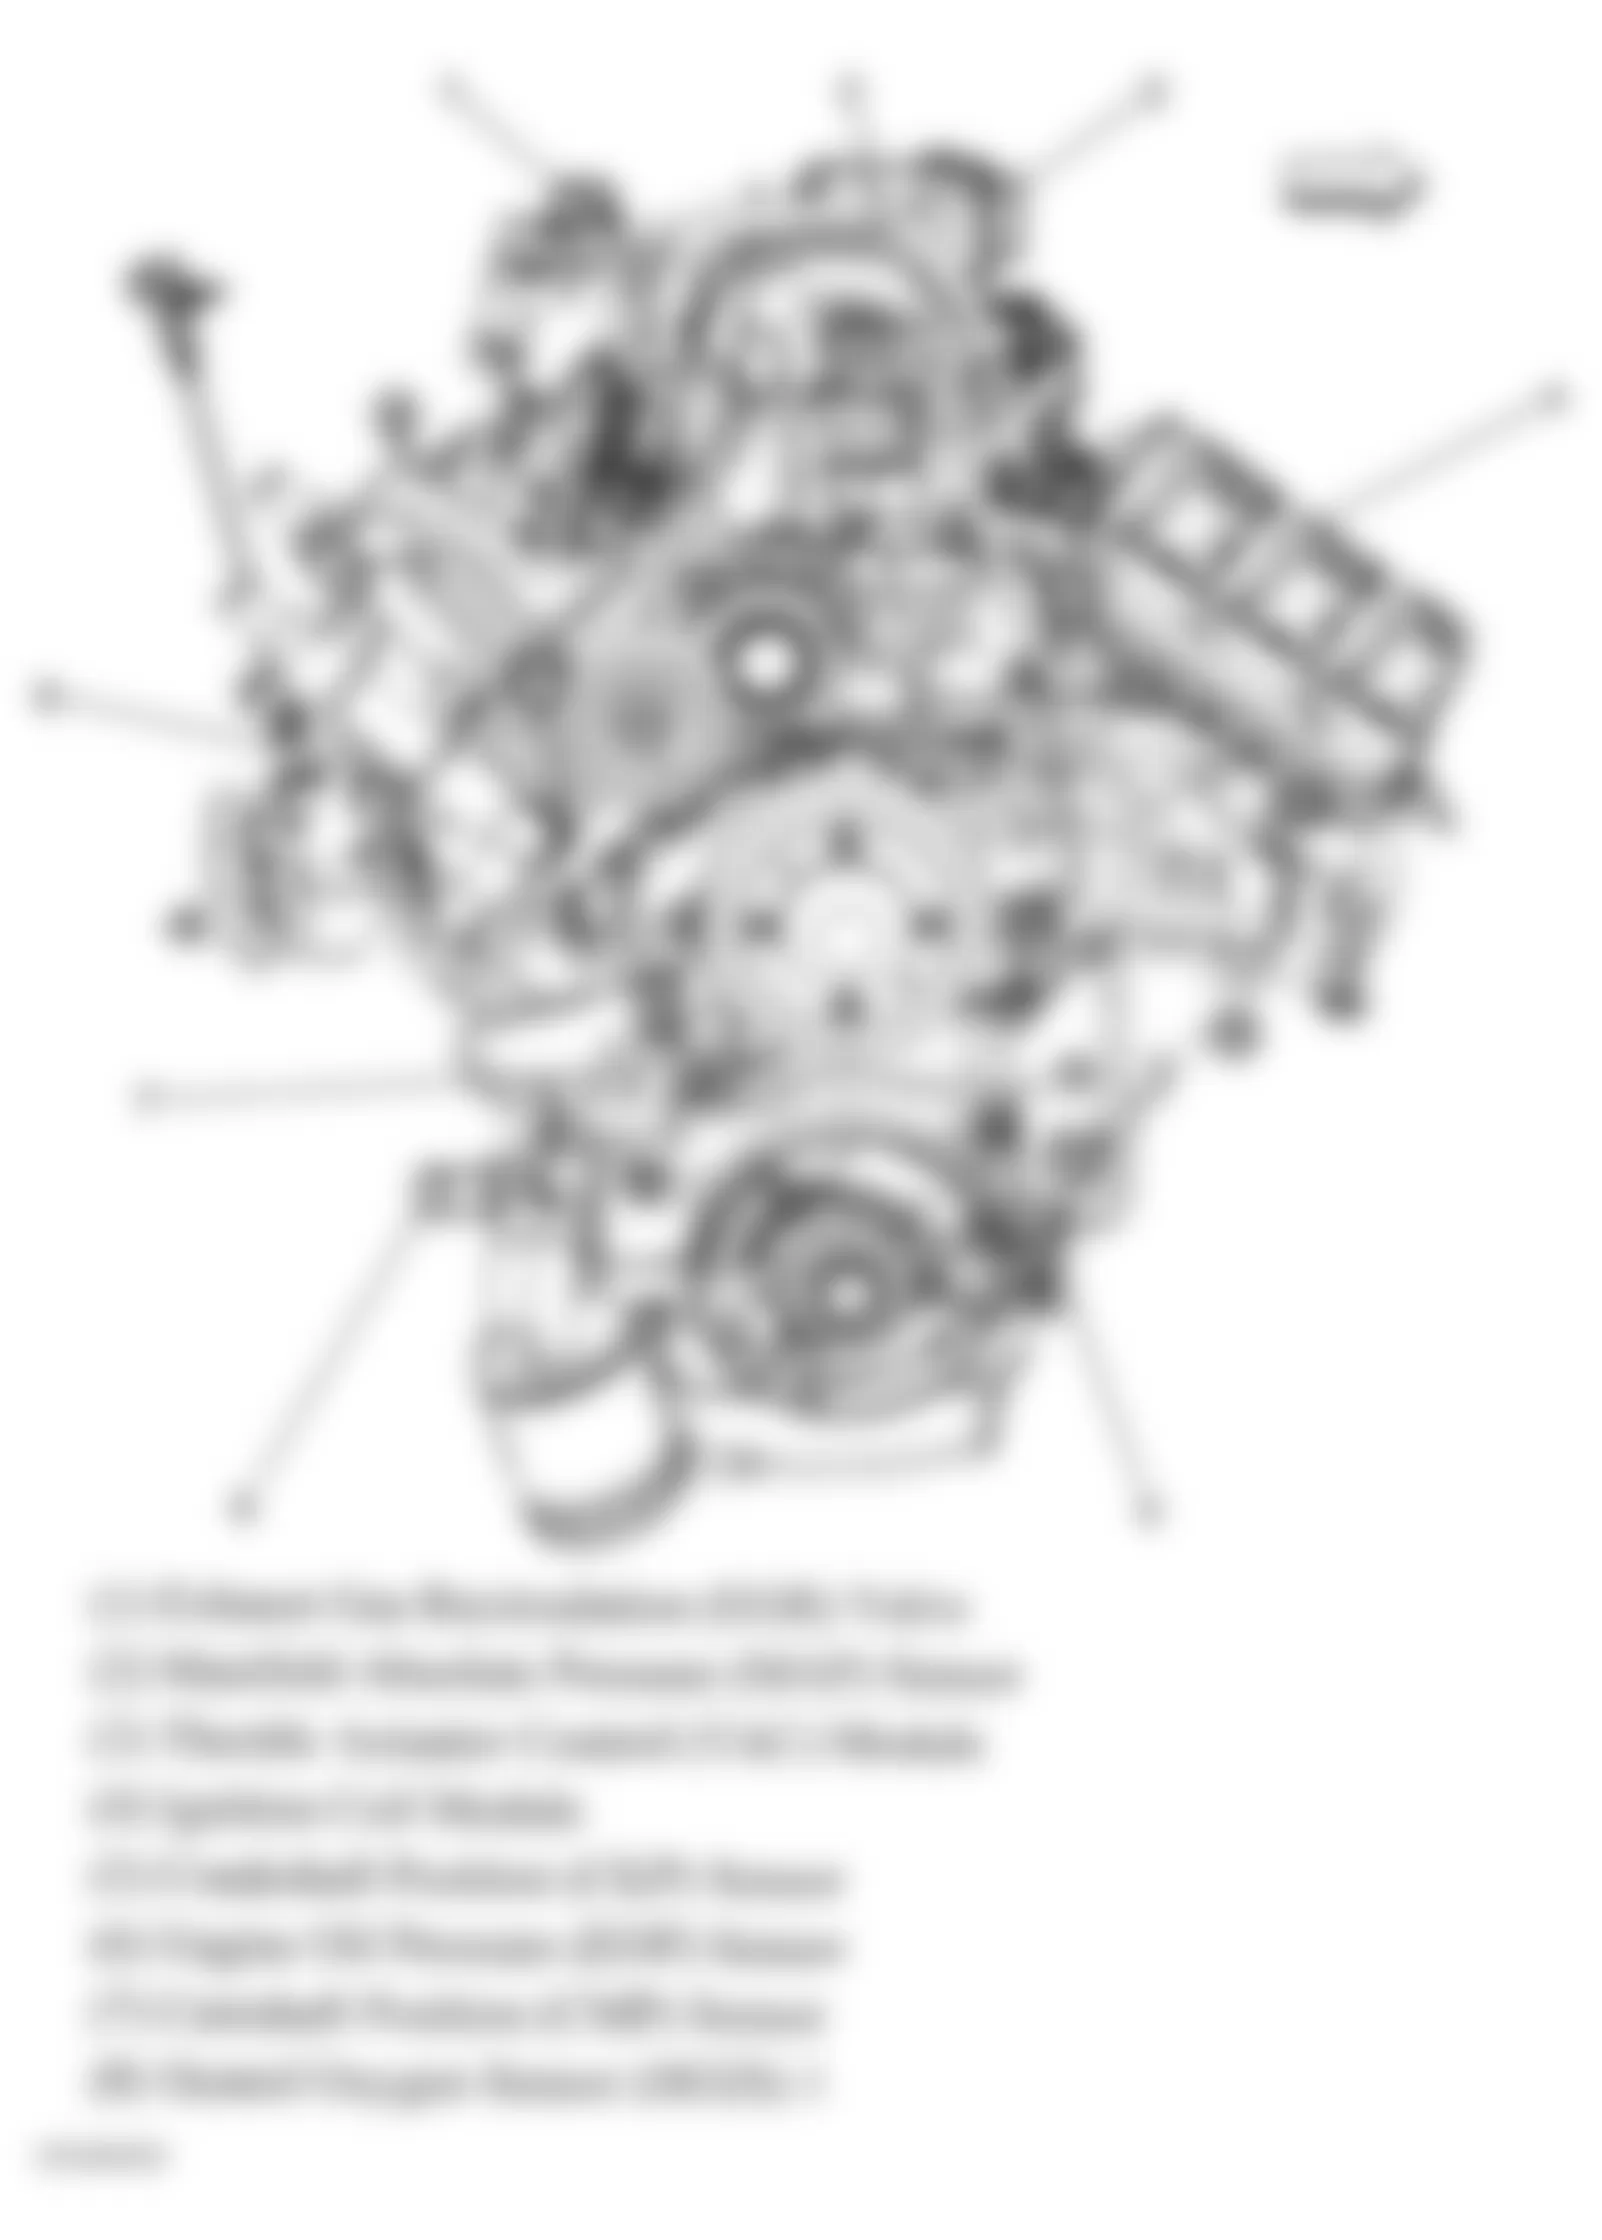 Buick LaCrosse CXL 2006 - Component Locations -  Front Of Engine (3.8L)